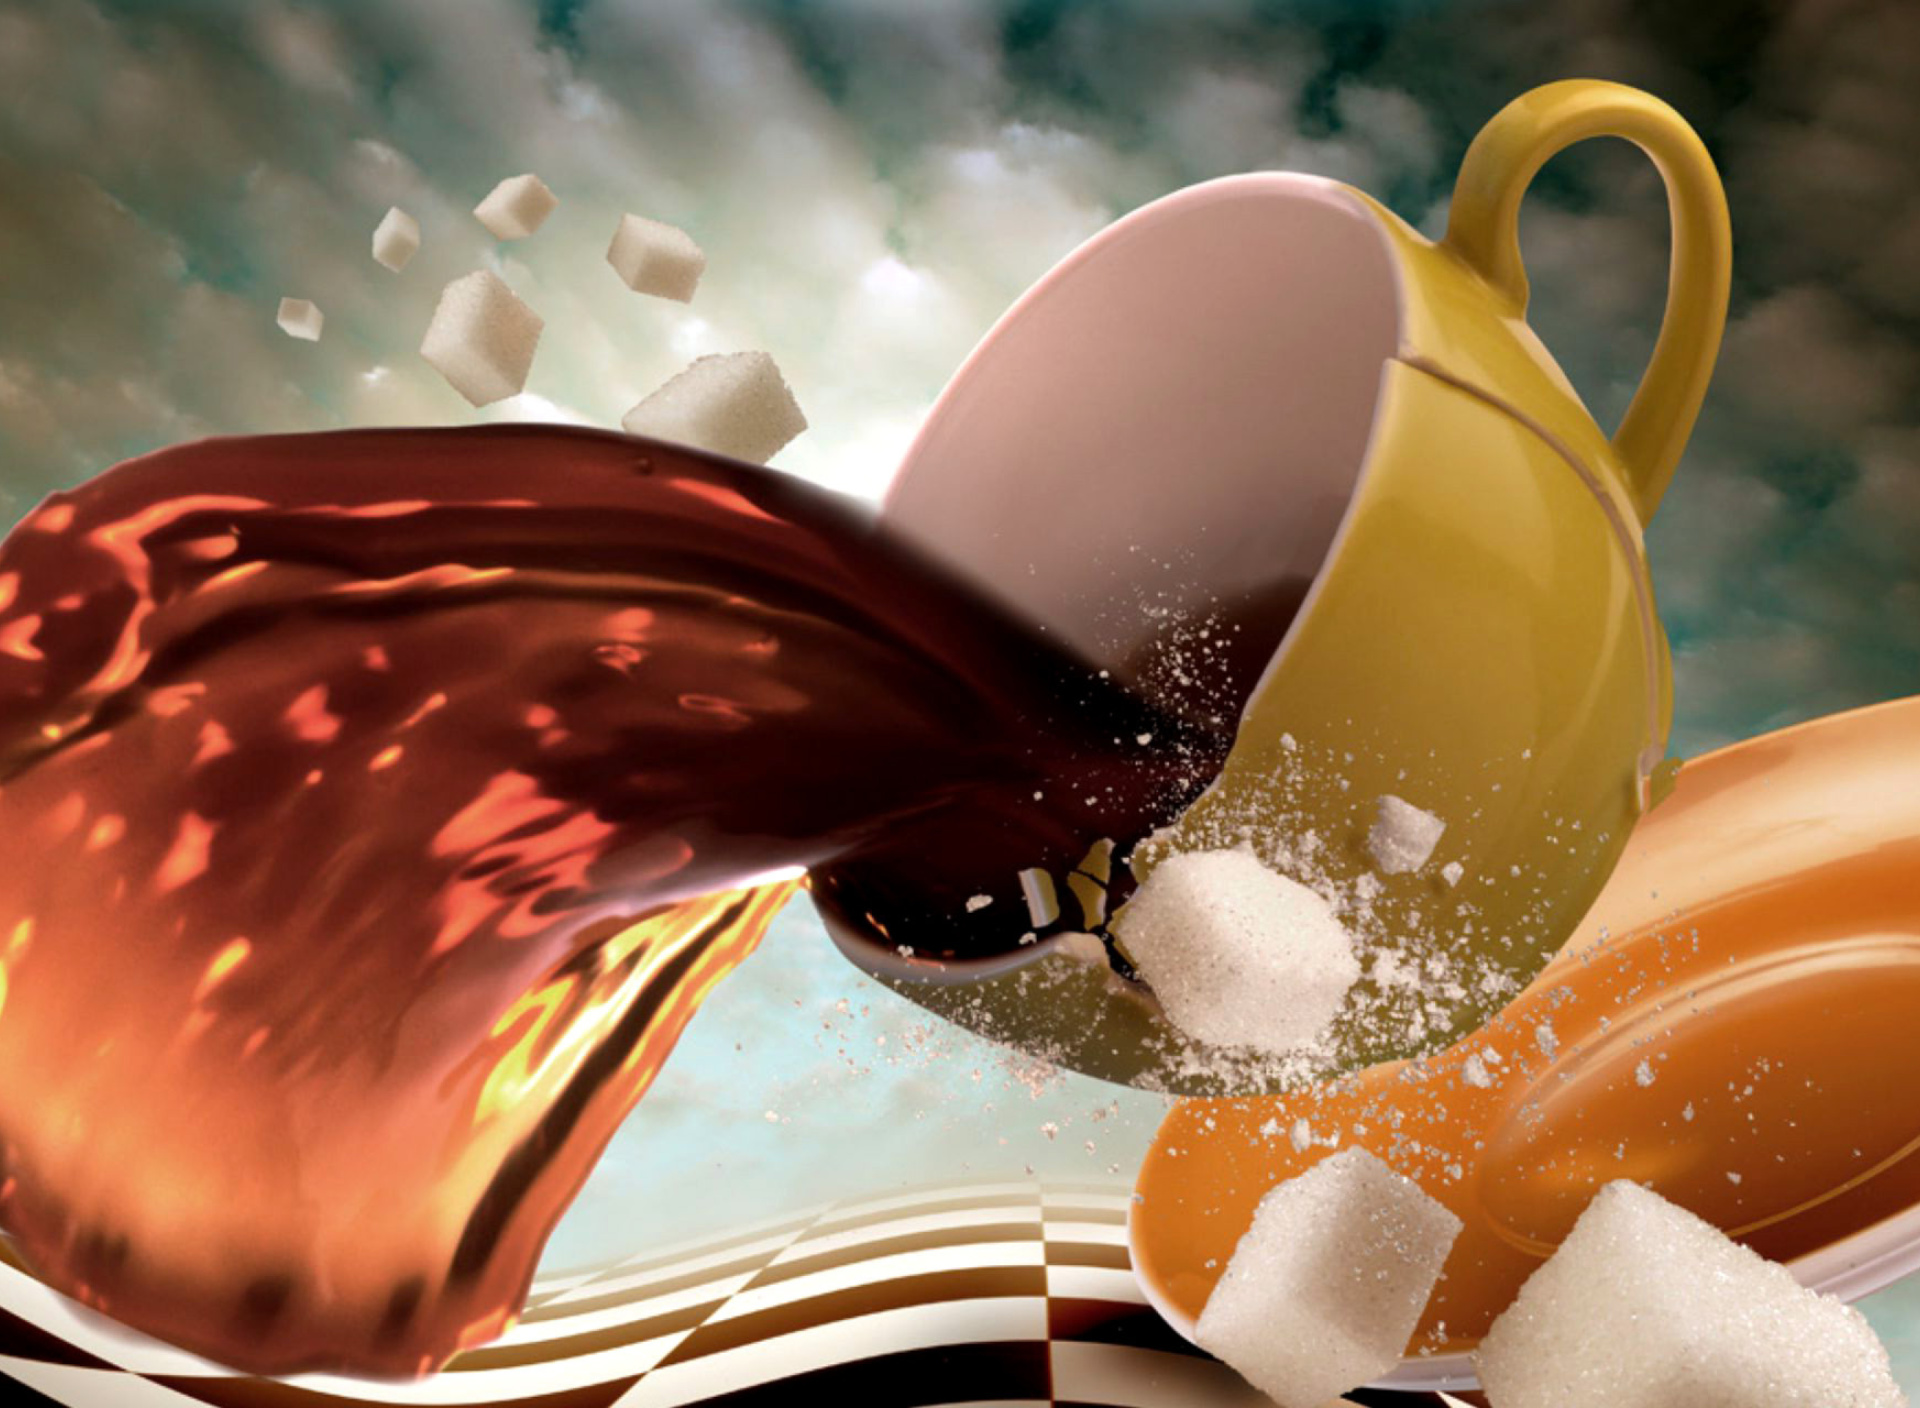 Surrealism Coffee Cup with Sugar cubes screenshot #1 1920x1408